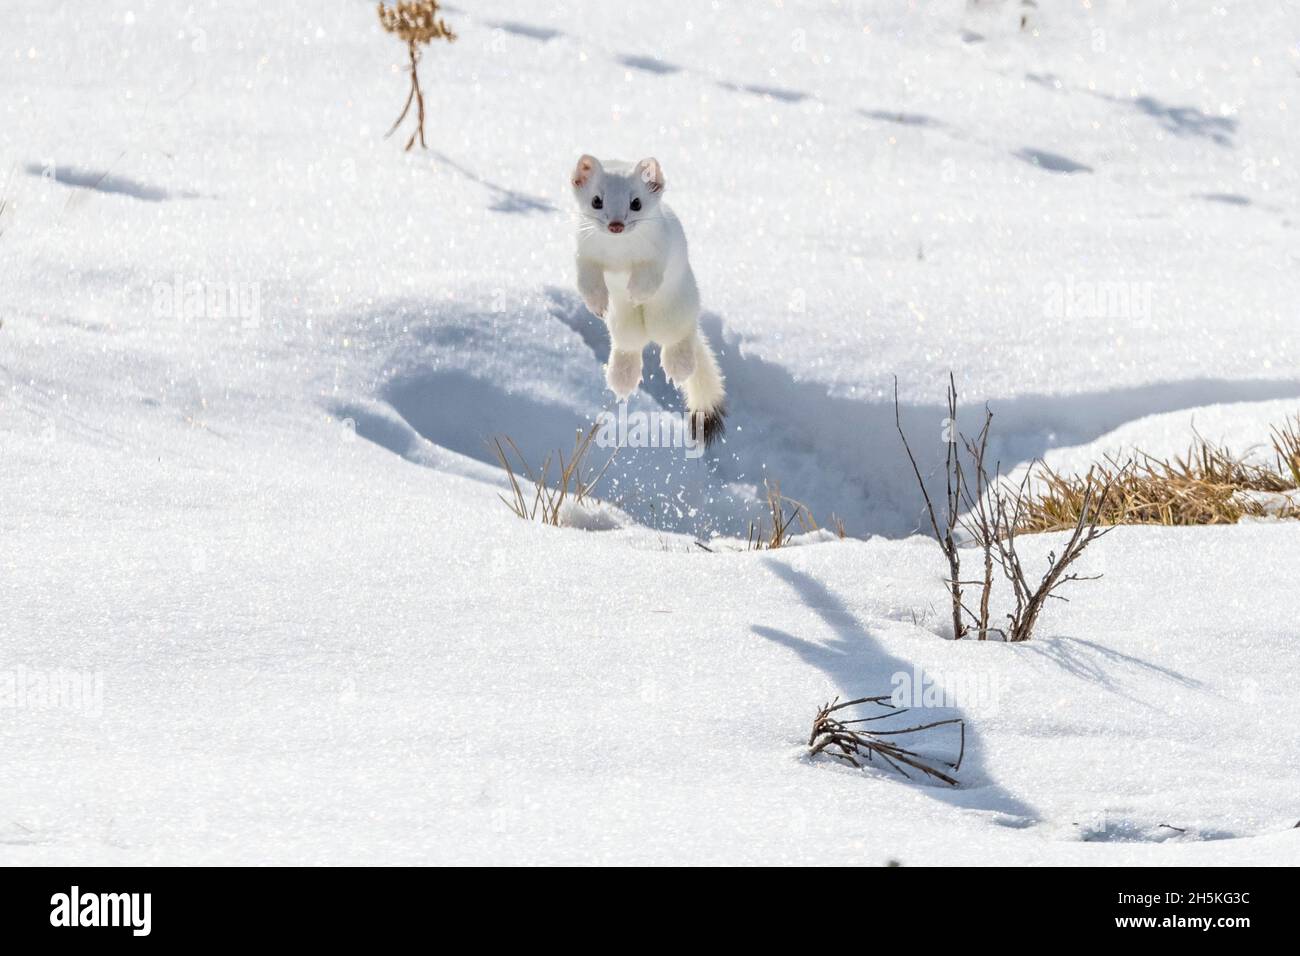 A short-tailed weasel (Mustela erminea) leaping up in the air in the snow looking at camera, camouflaged in its white winter coat Stock Photo